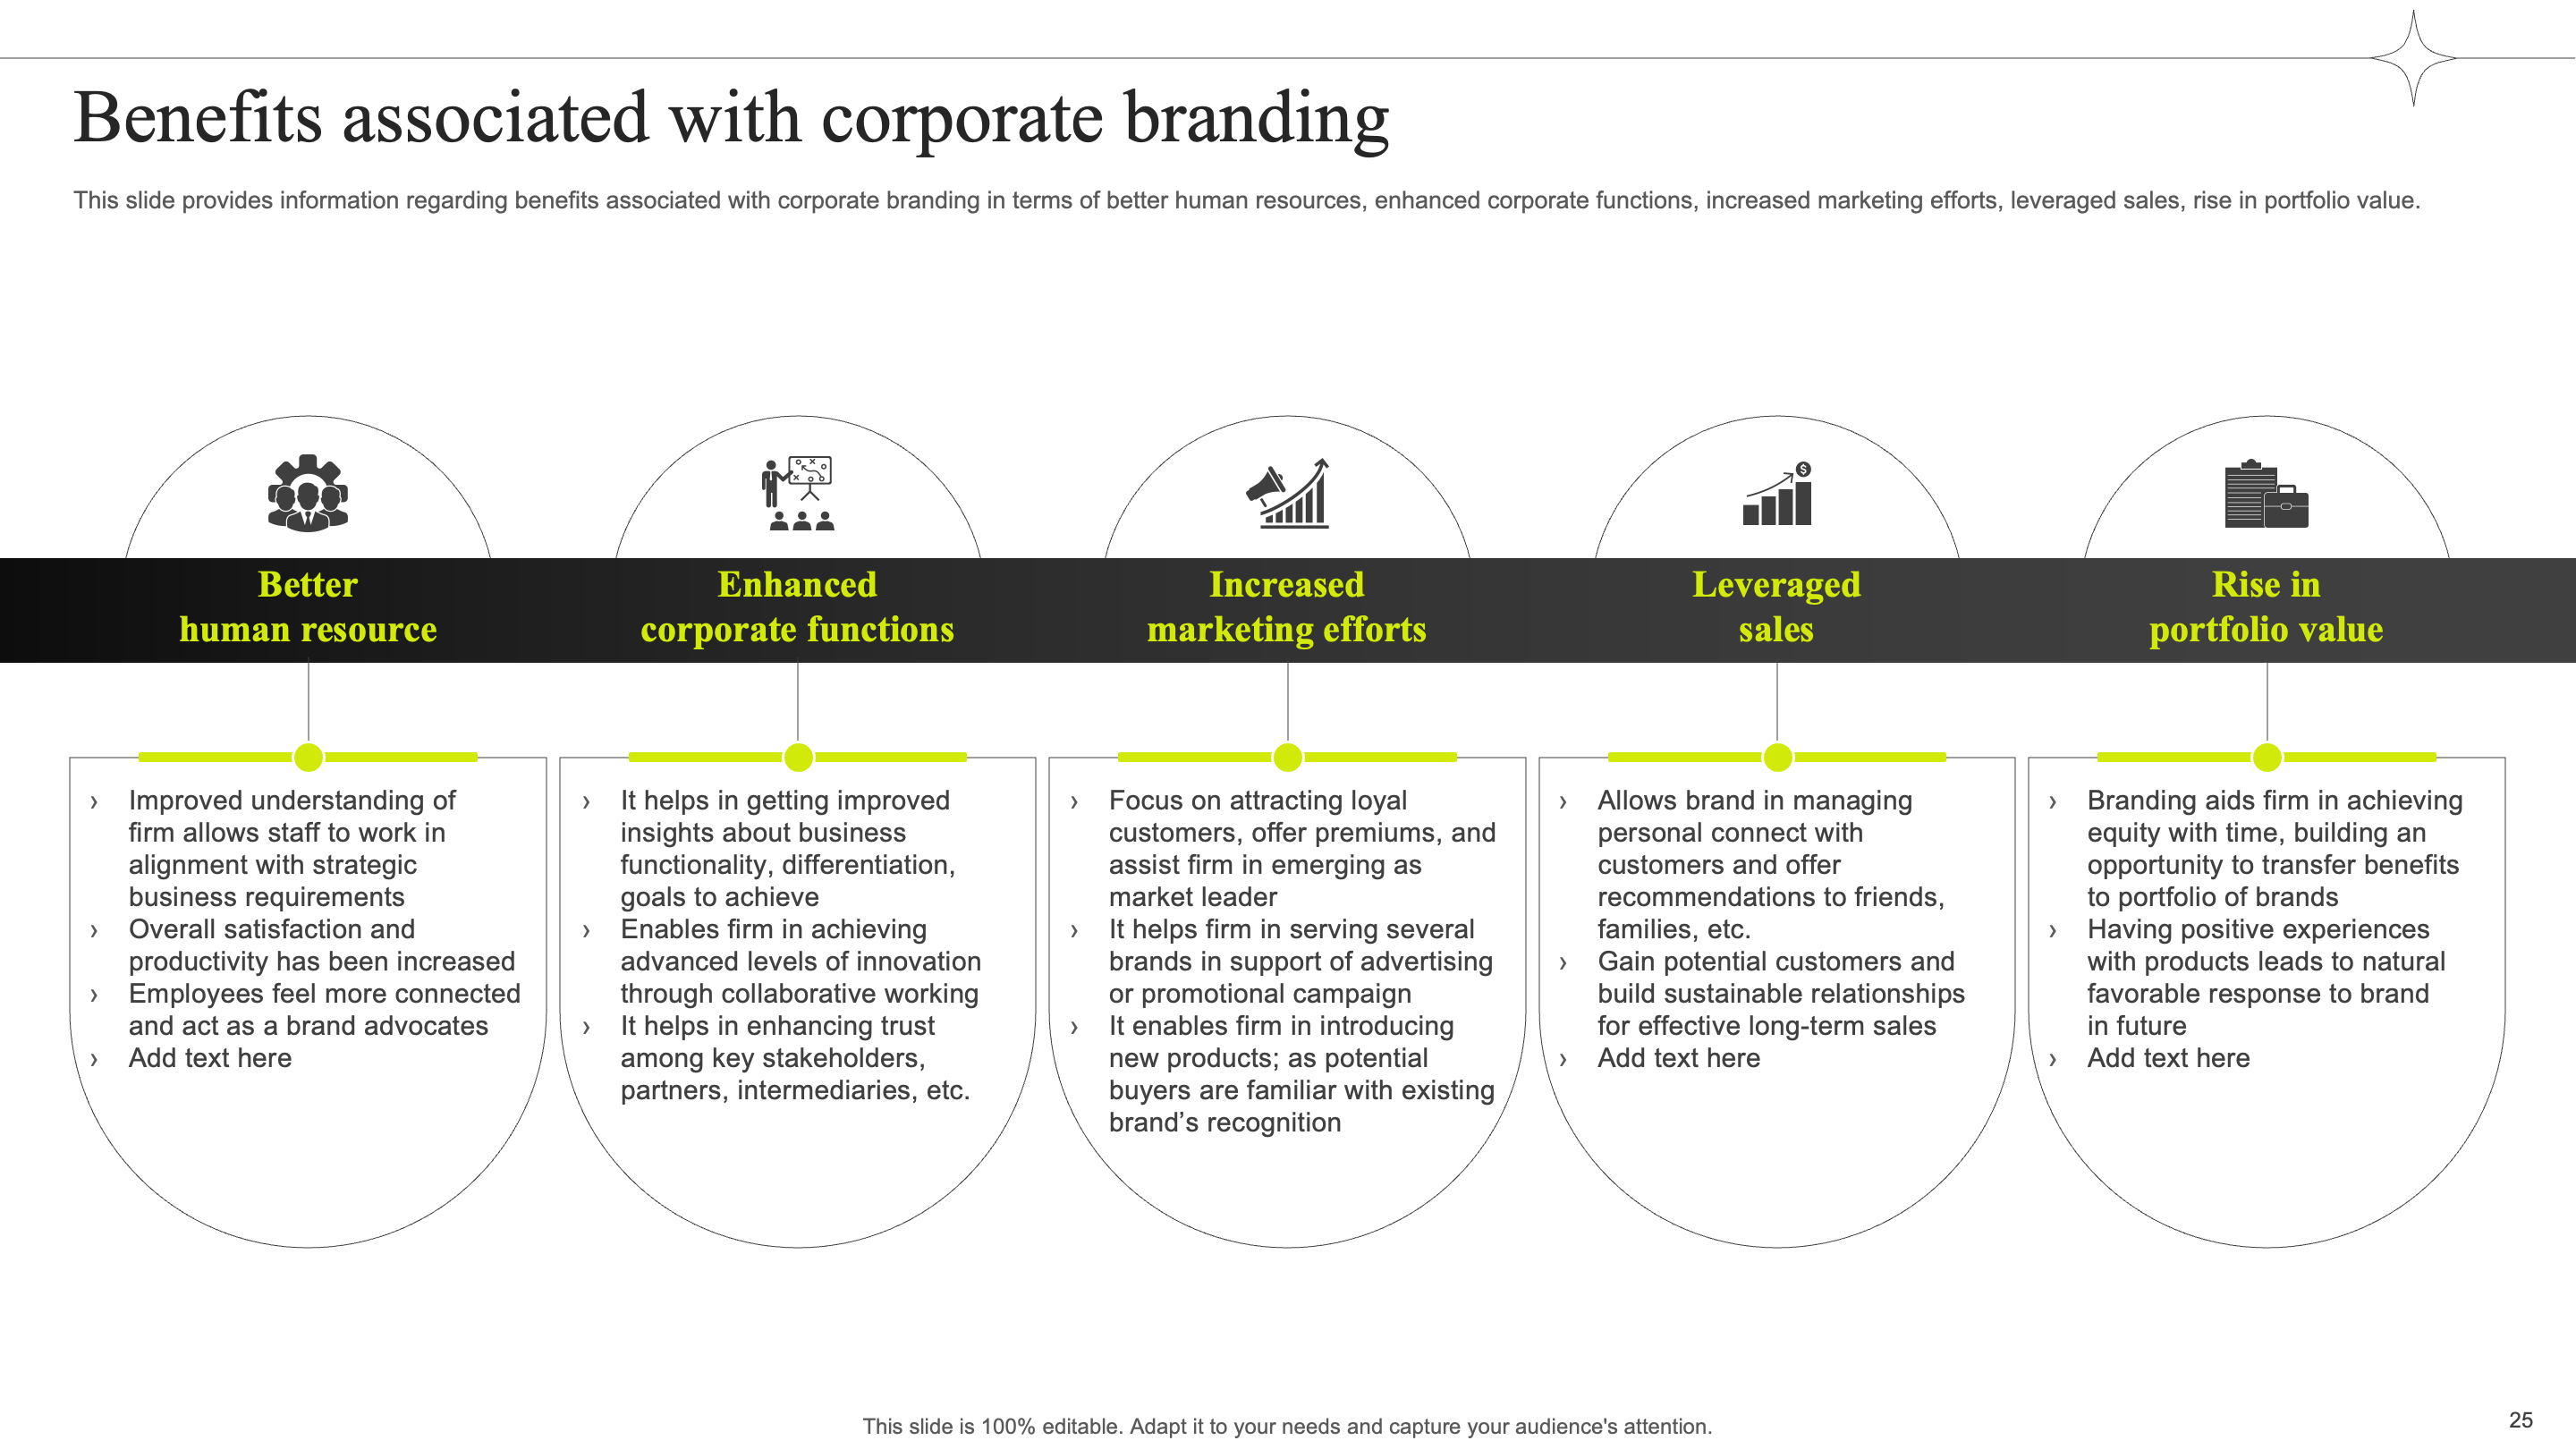 Benefits Associated with Corporate Branding 